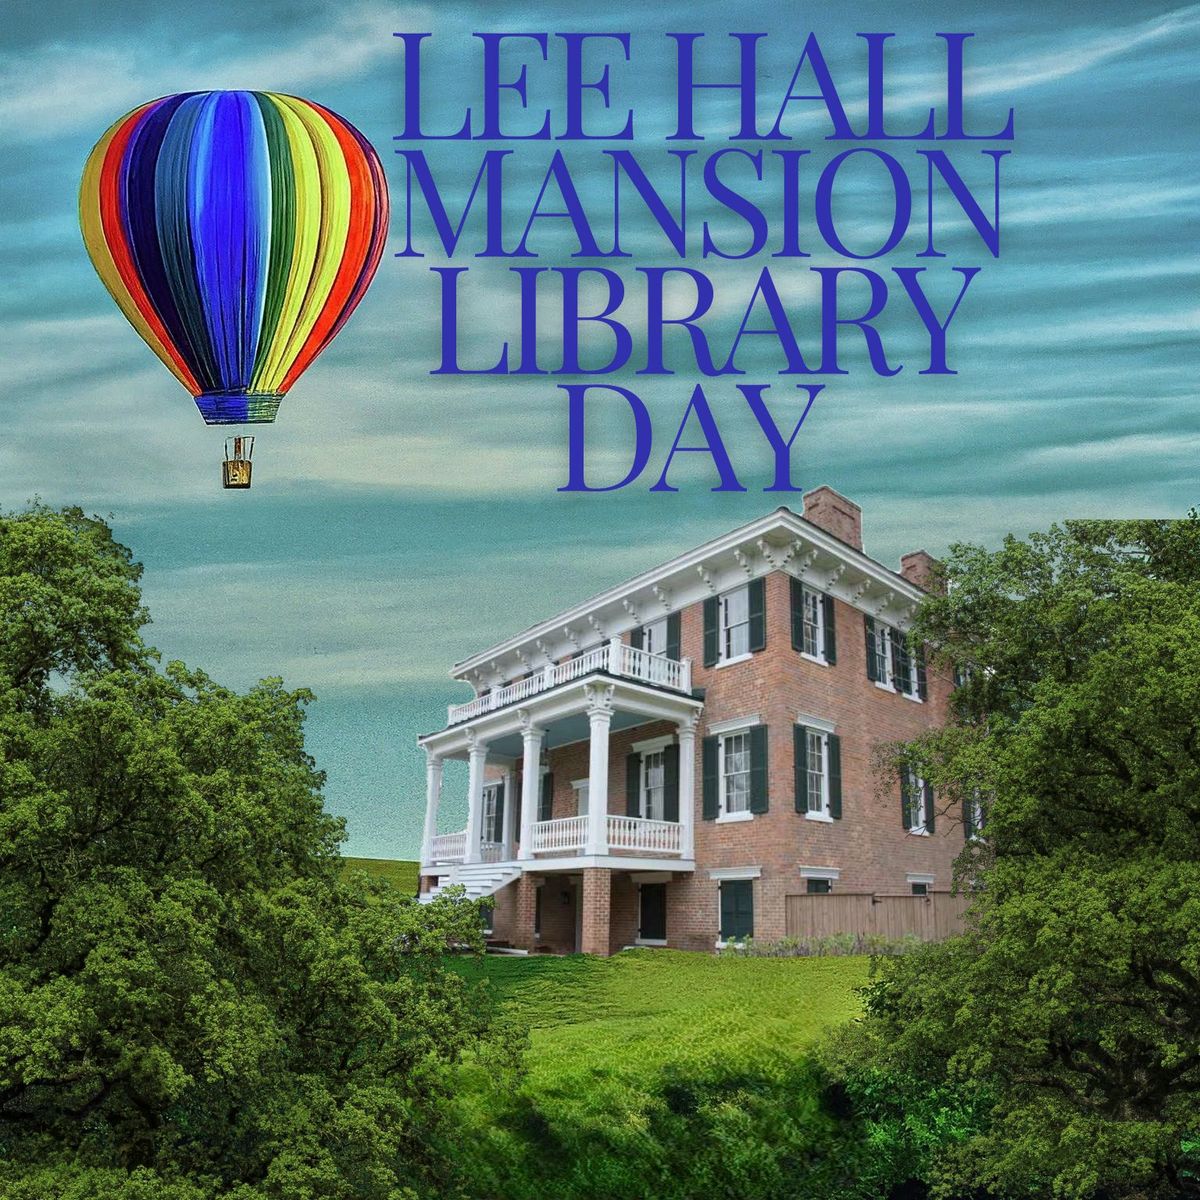 Explore with Your Library Card! Day at Lee Hall Mansion